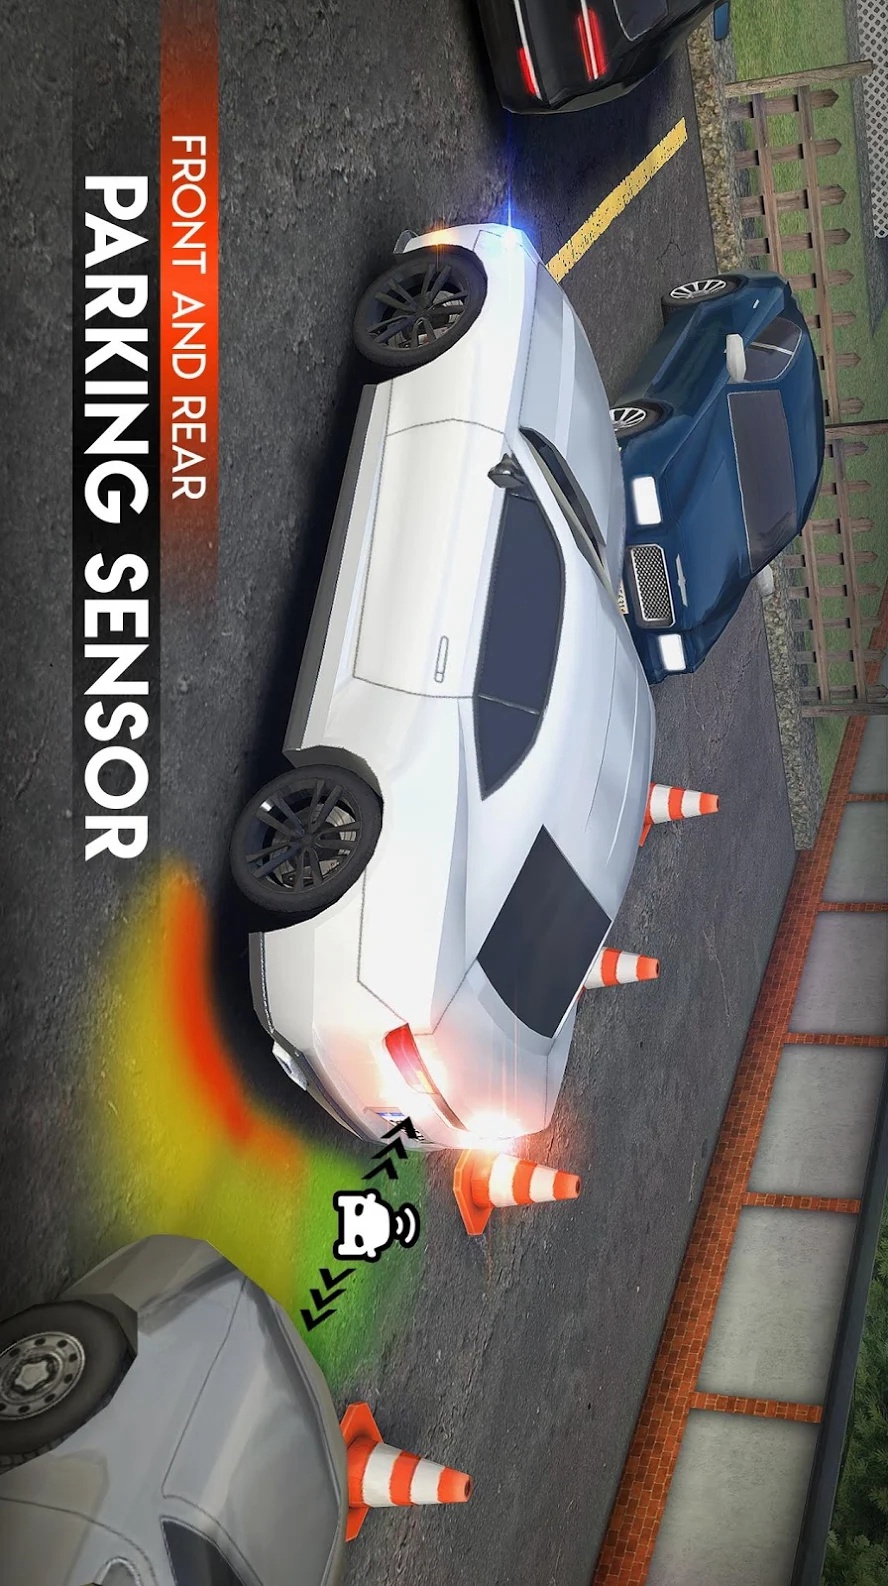 Car Parking Pro - Car Parking Game & Driving Game(Large currency)